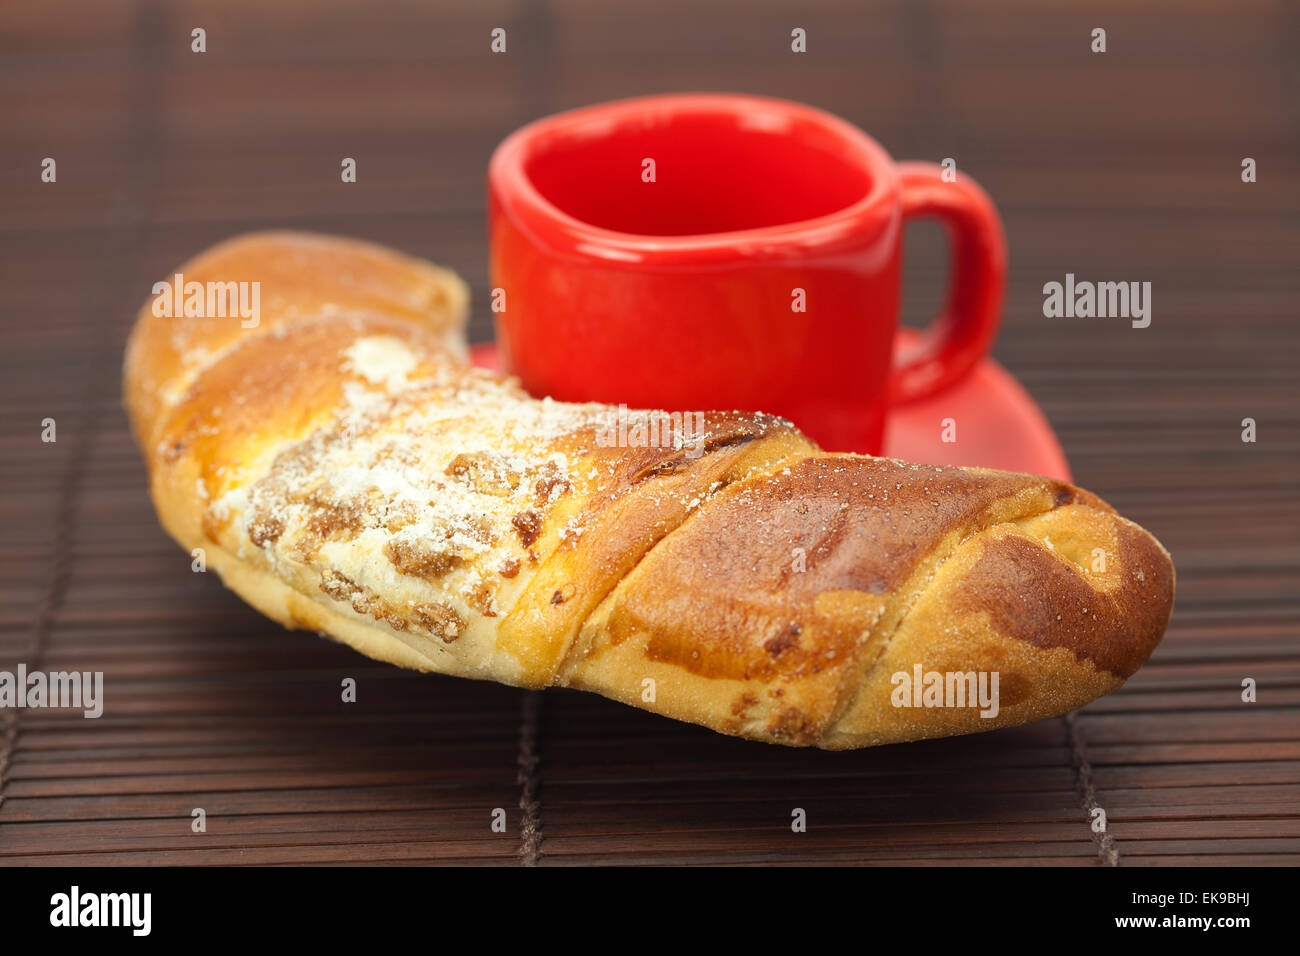 Cup with a plate and roll on a bamboo mat Stock Photo